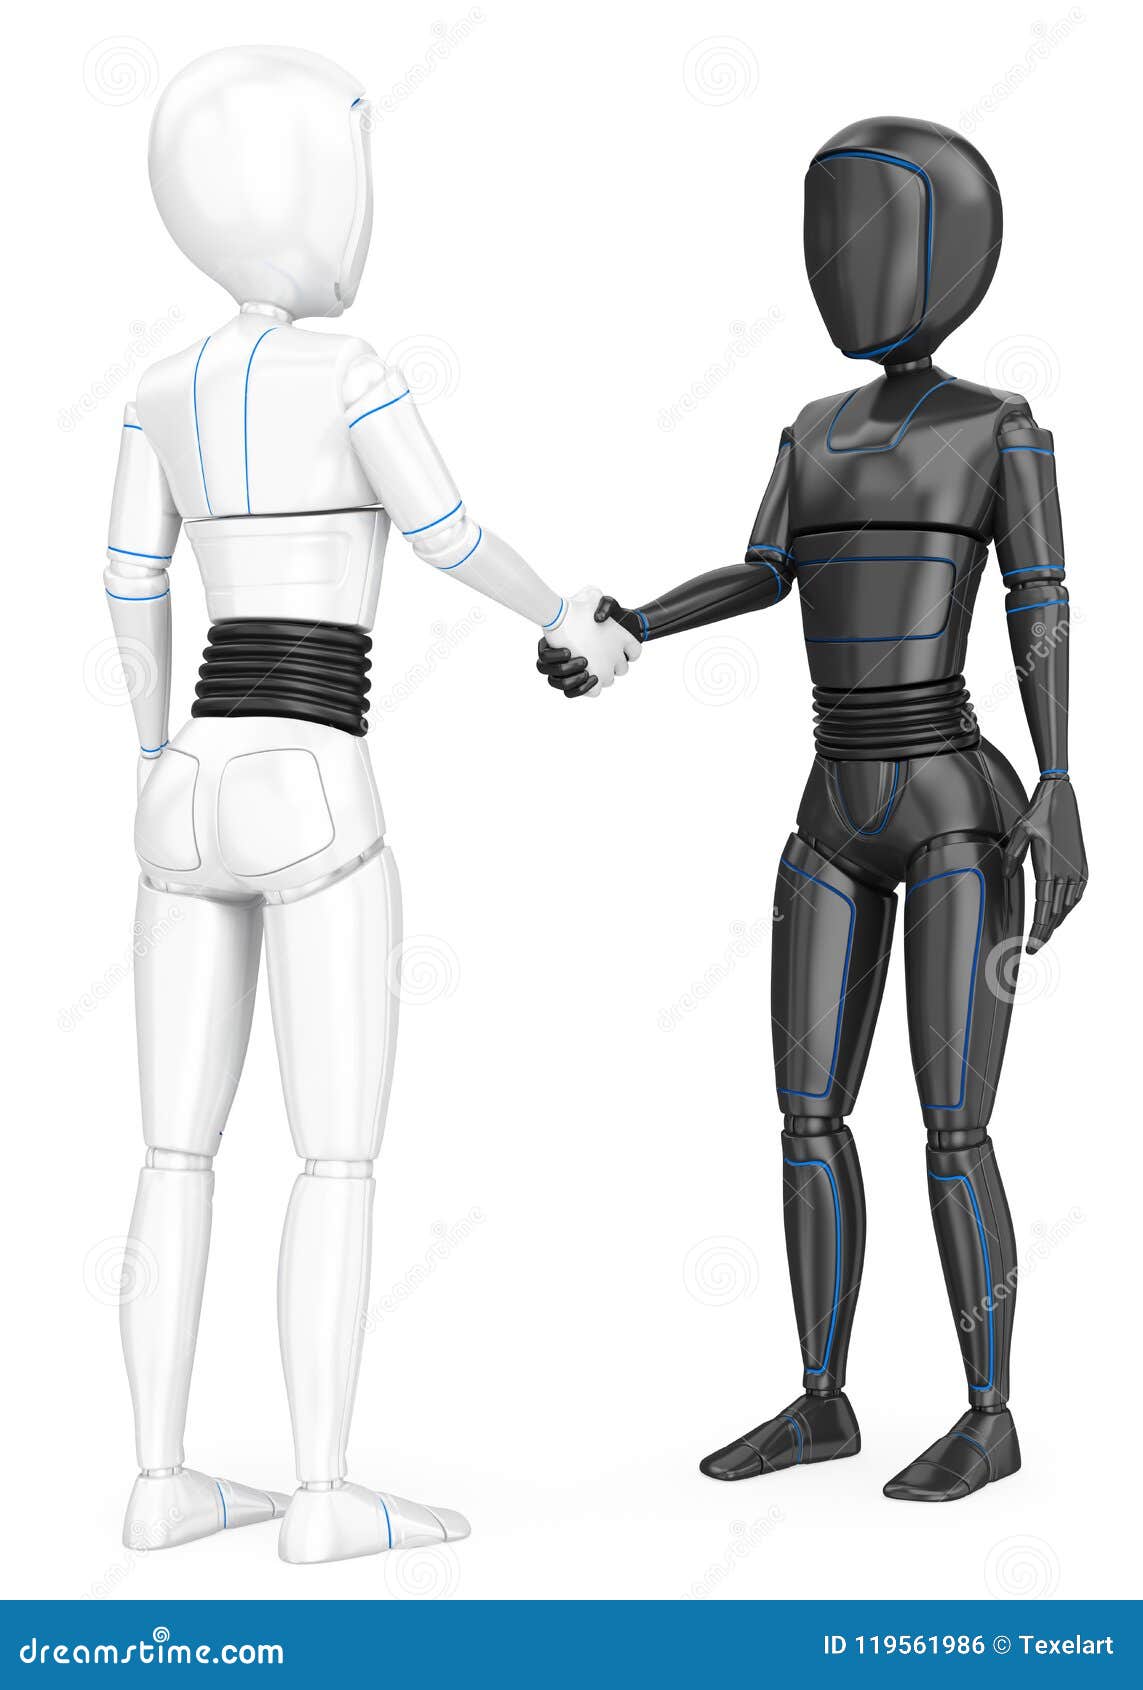 3d humanoid robot shaking hands with another robot